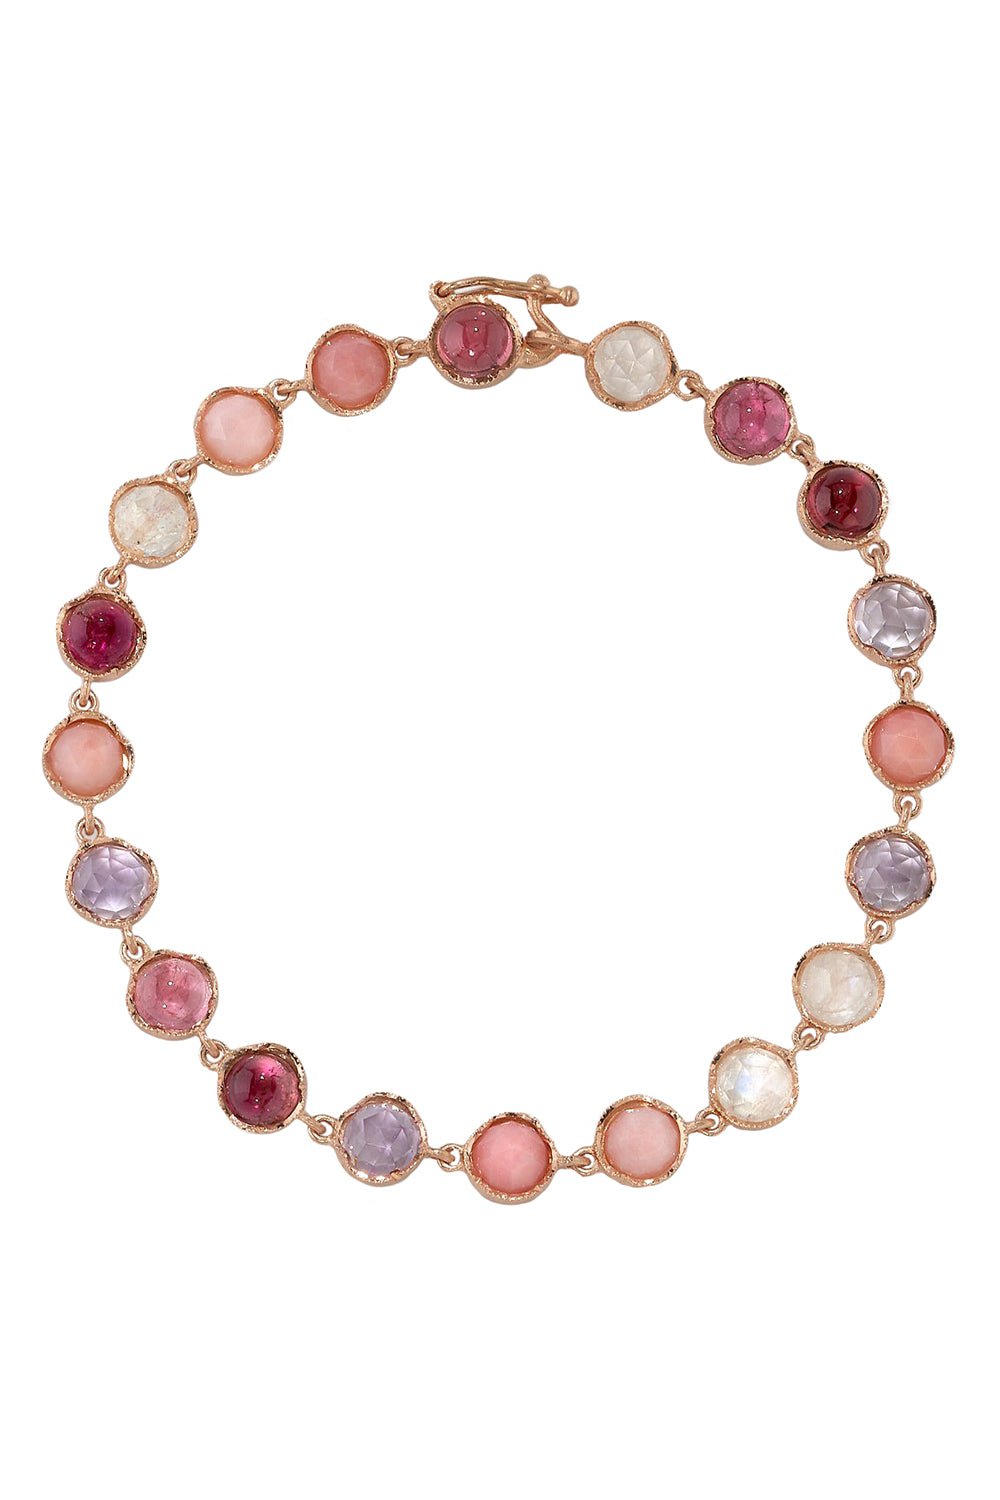 IRENE NEUWIRTH JEWELRY-Small Classic Pink Opal Link Mixed Bracelet-ROSE GOLD